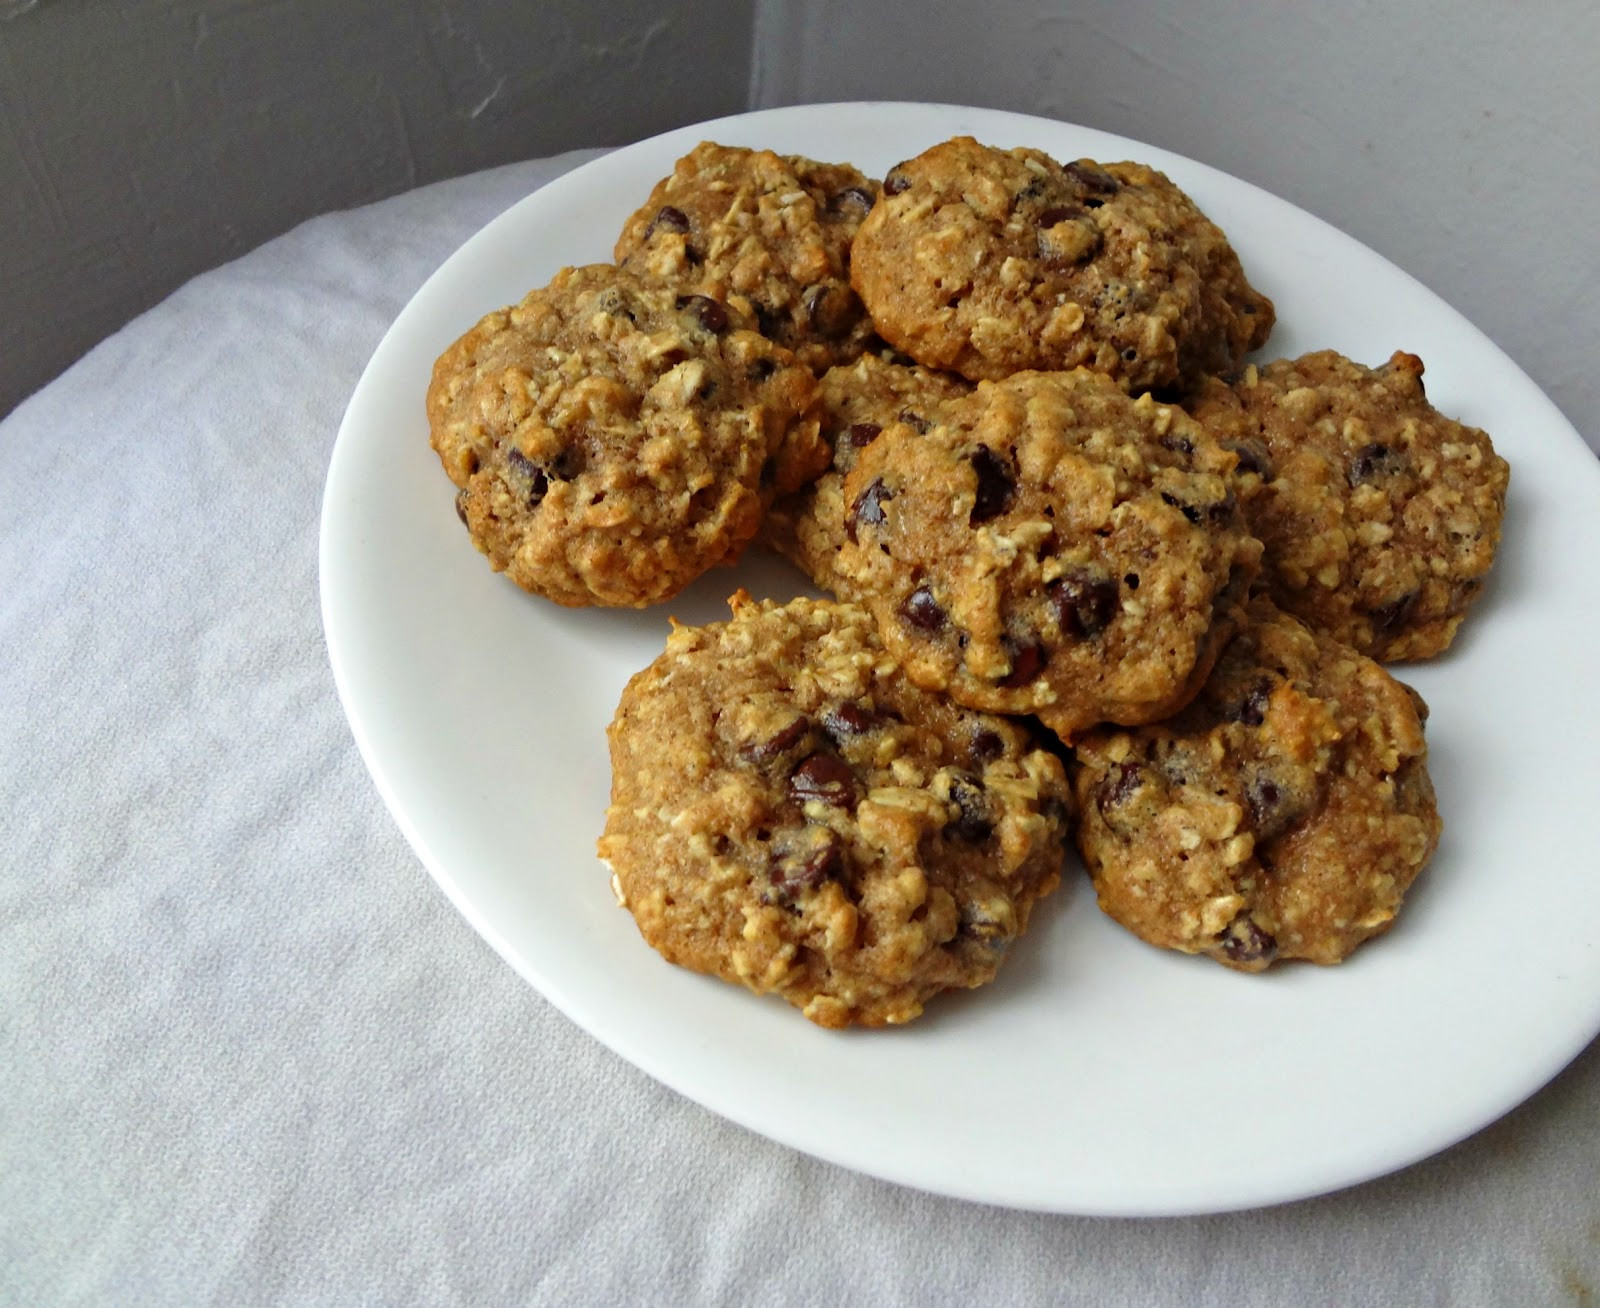 Oatmeal Healthy Cookies
 The Cooking Actress Healthy Oatmeal Chocolate Chip Cookies